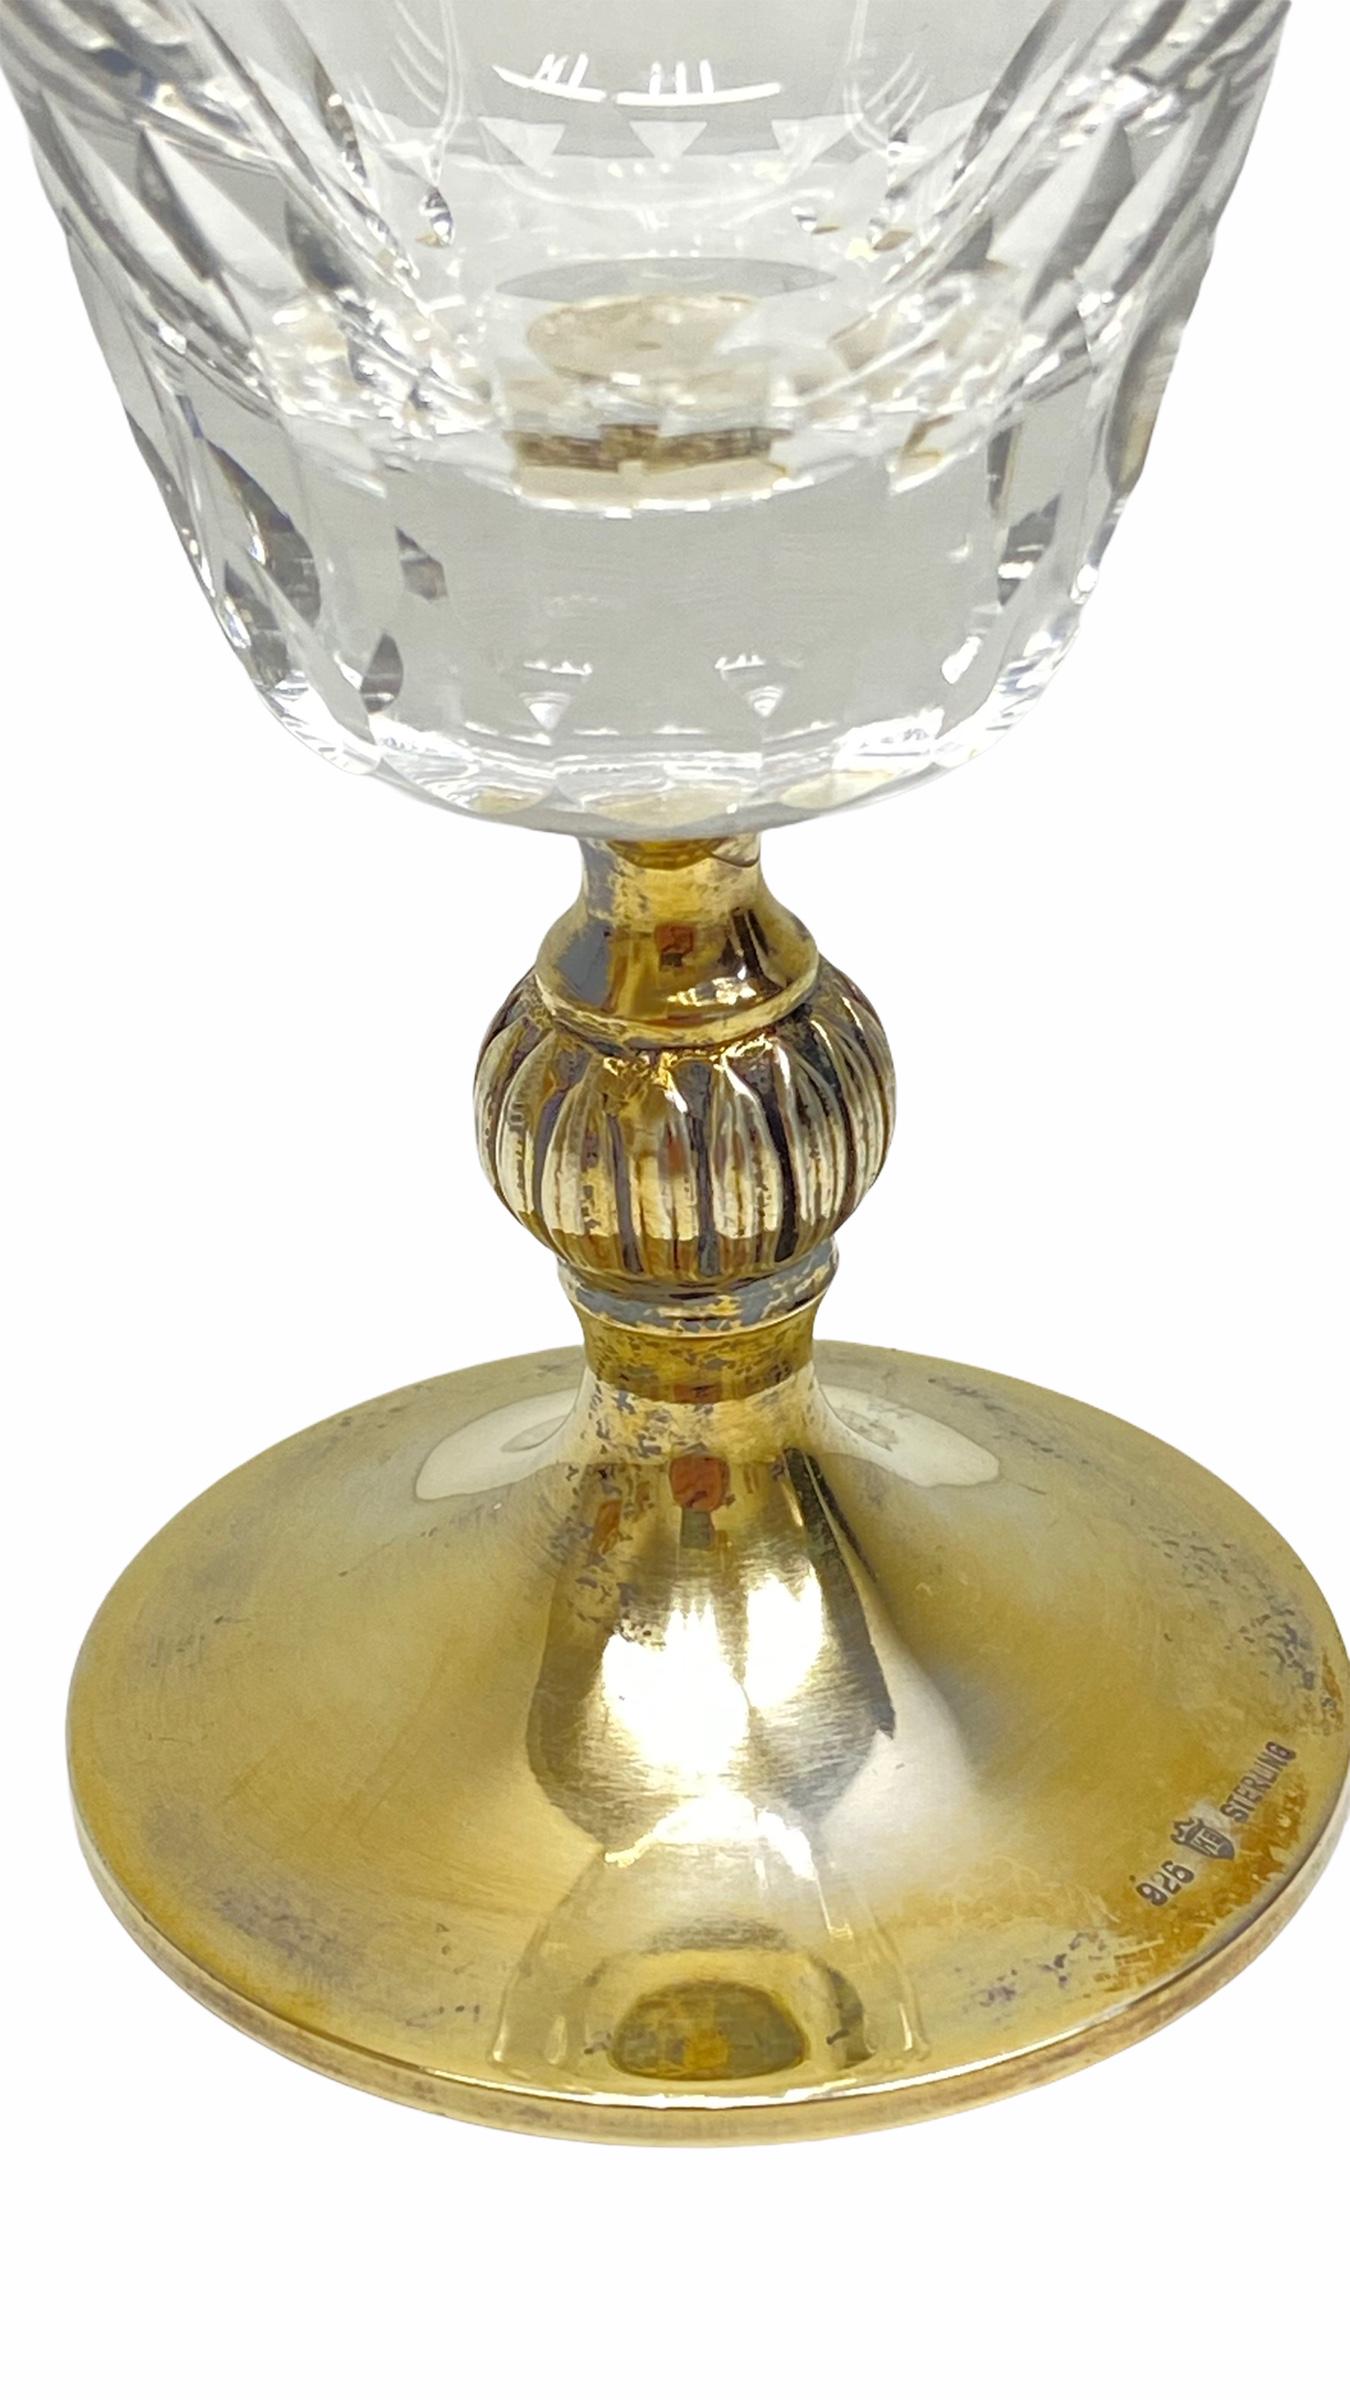 A beautiful crystal glass with gold plated sterling silver stem, found at an estate sale in Austria. Very good vintage condition, consistent with age and use. Marked with Sterling and 925. No chips, no cracks, no repairs.